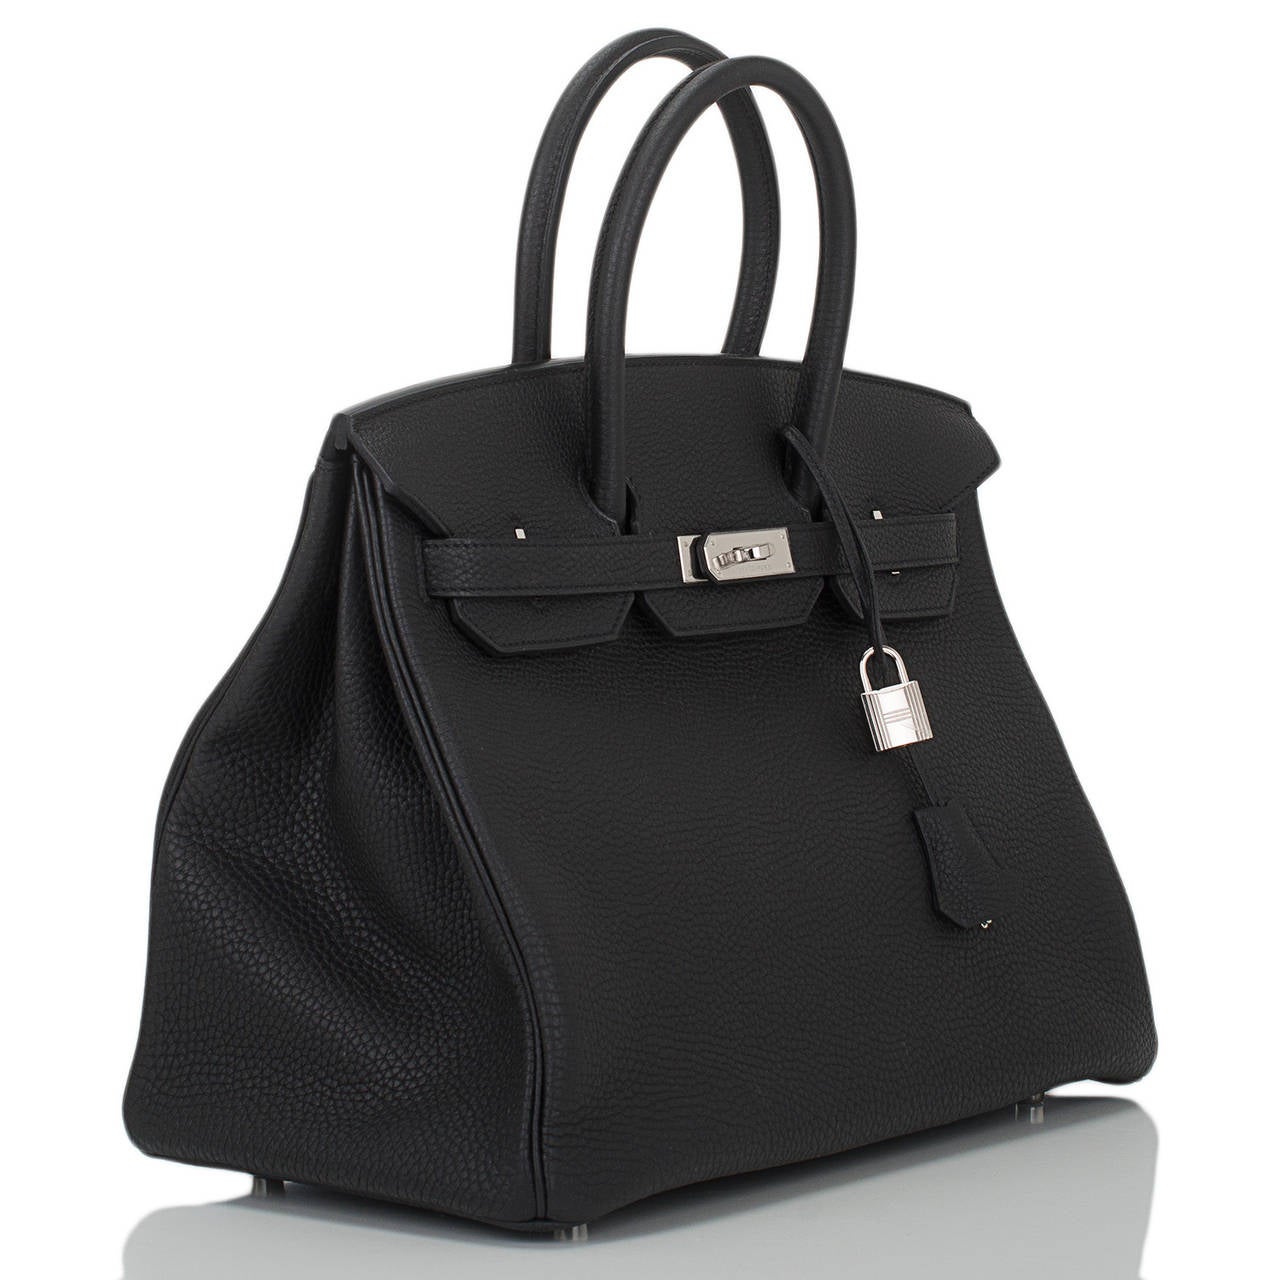 Hermes black Birkin 35cm in togo (bull) leather with palladium hardware.

The Hermes Birkin is the most coveted and the hardest to secure handbag in the world. Immediately recognizable by its shape, its thin straps with metal plates on end of each